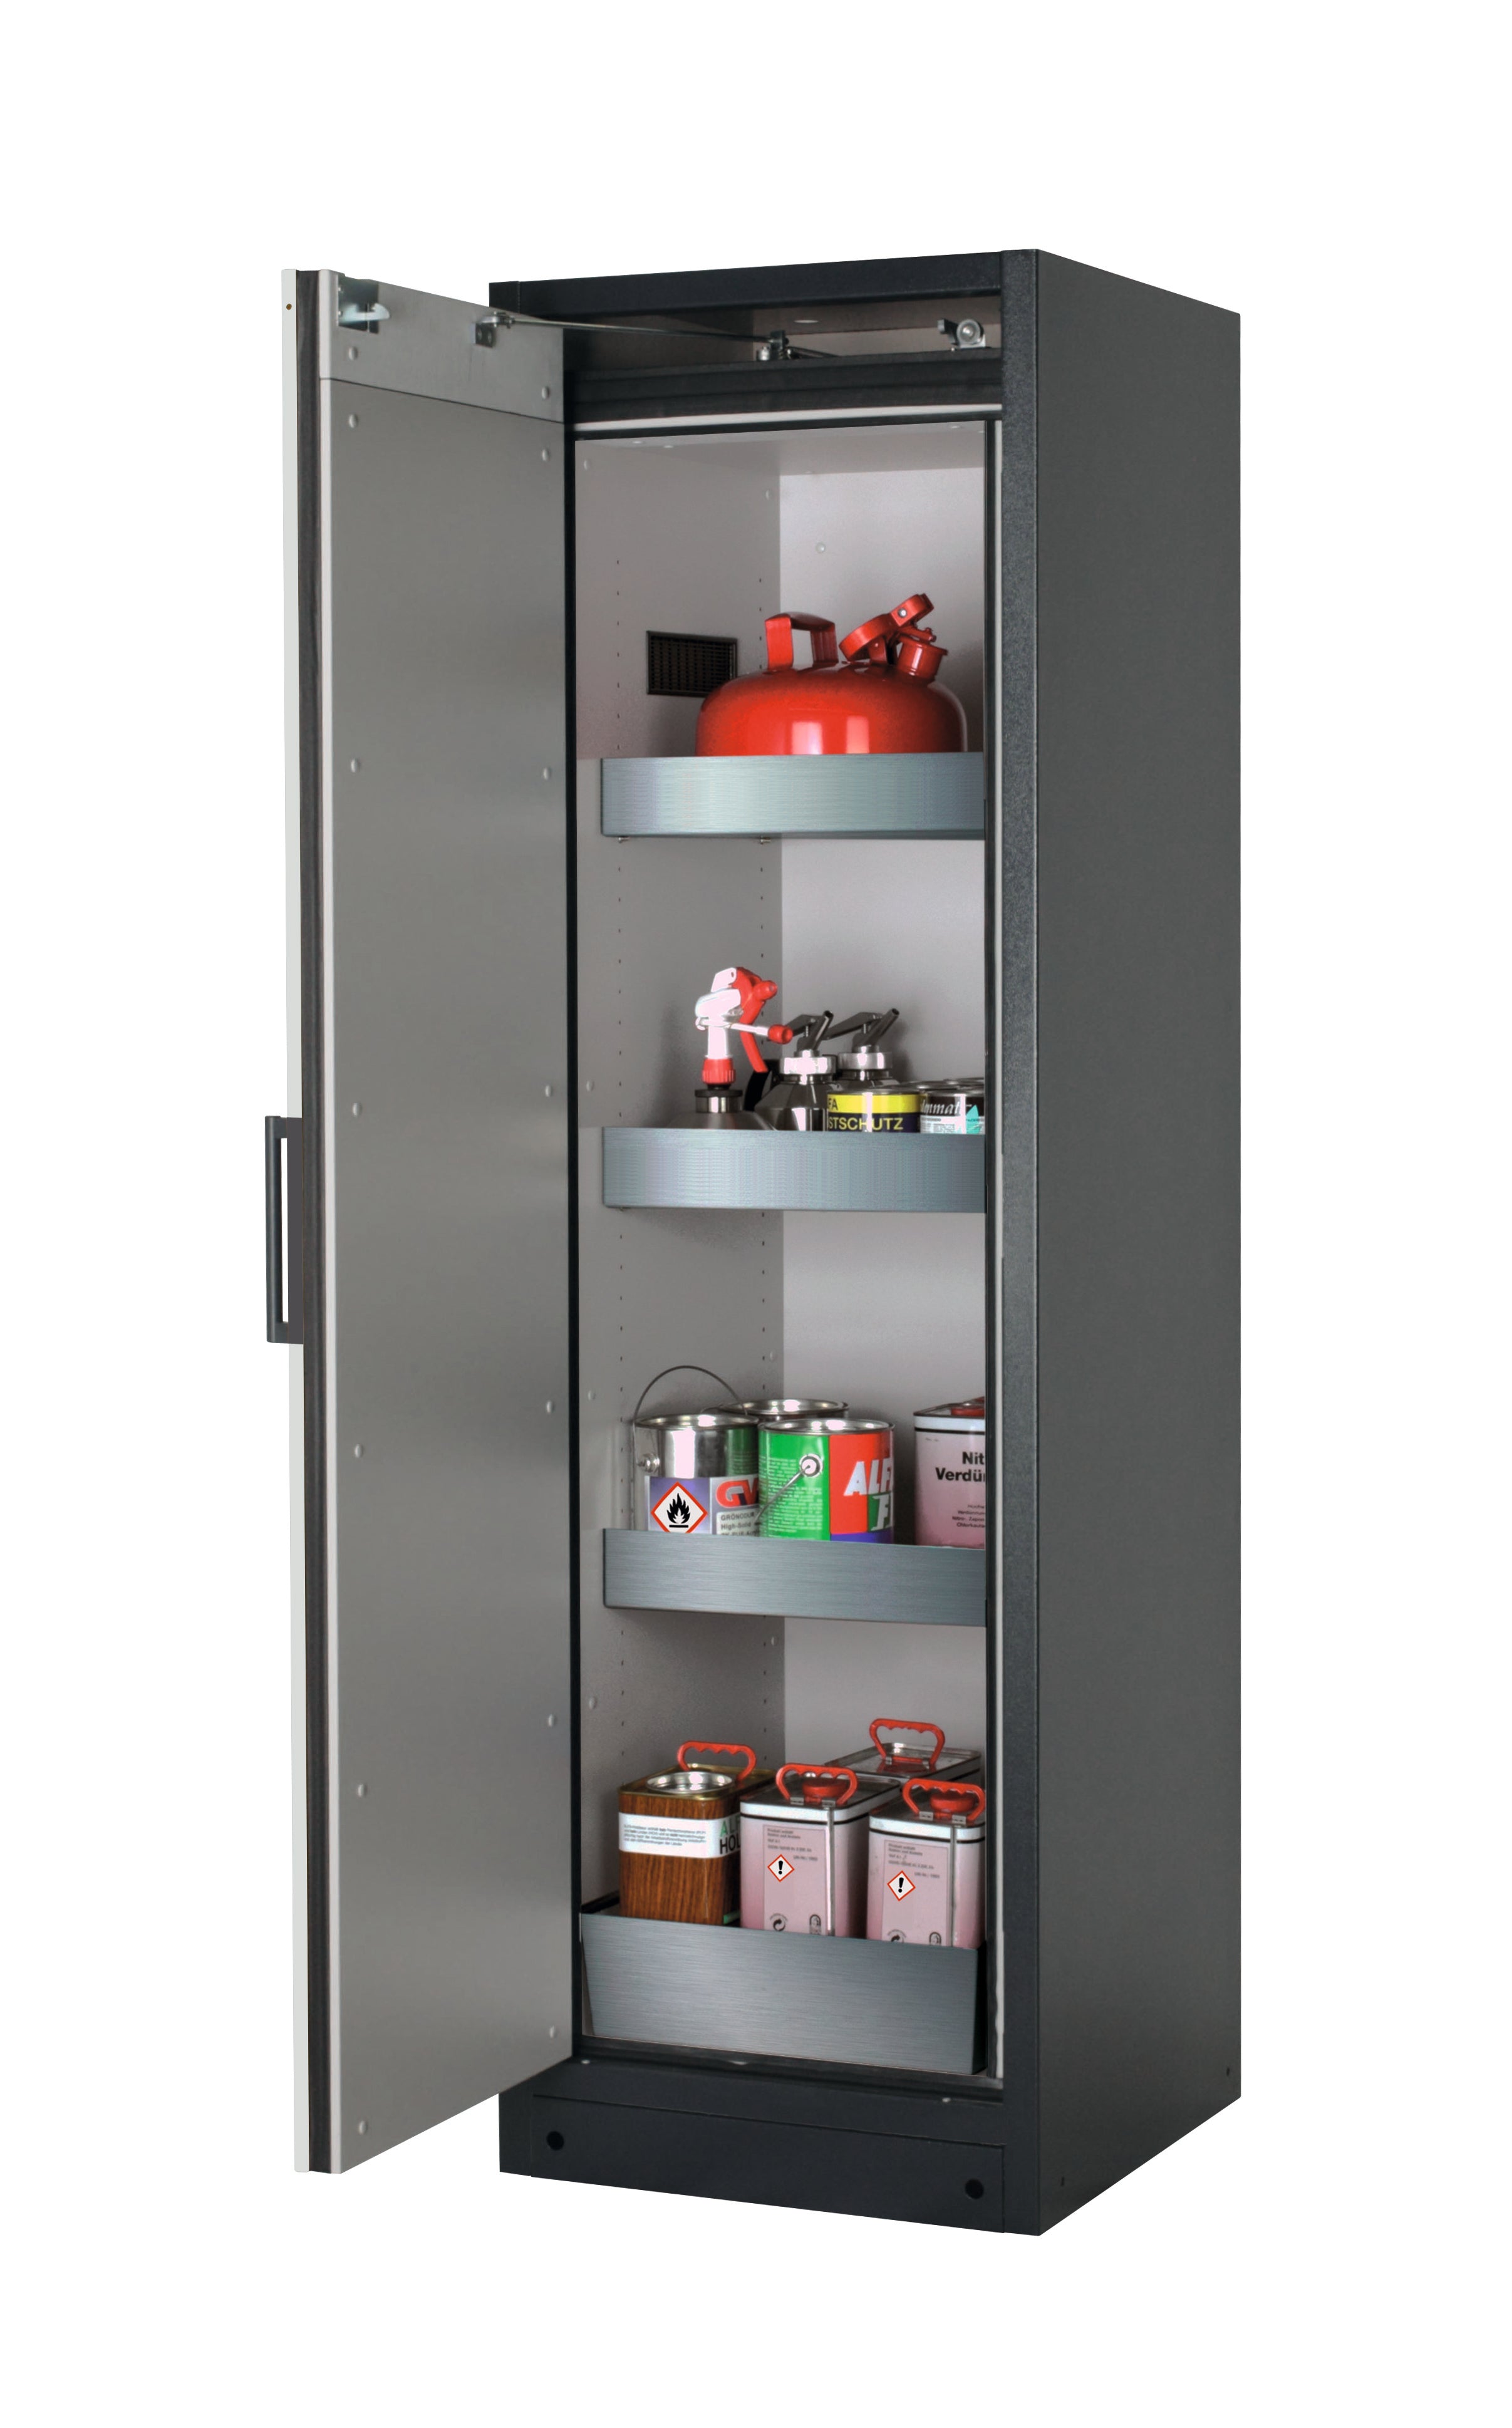 Type 90 safety storage cabinet Q-CLASSIC-90 model Q90.195.060 in light grey RAL 7035 with 3x tray shelf (standard) (stainless steel 1.4301),